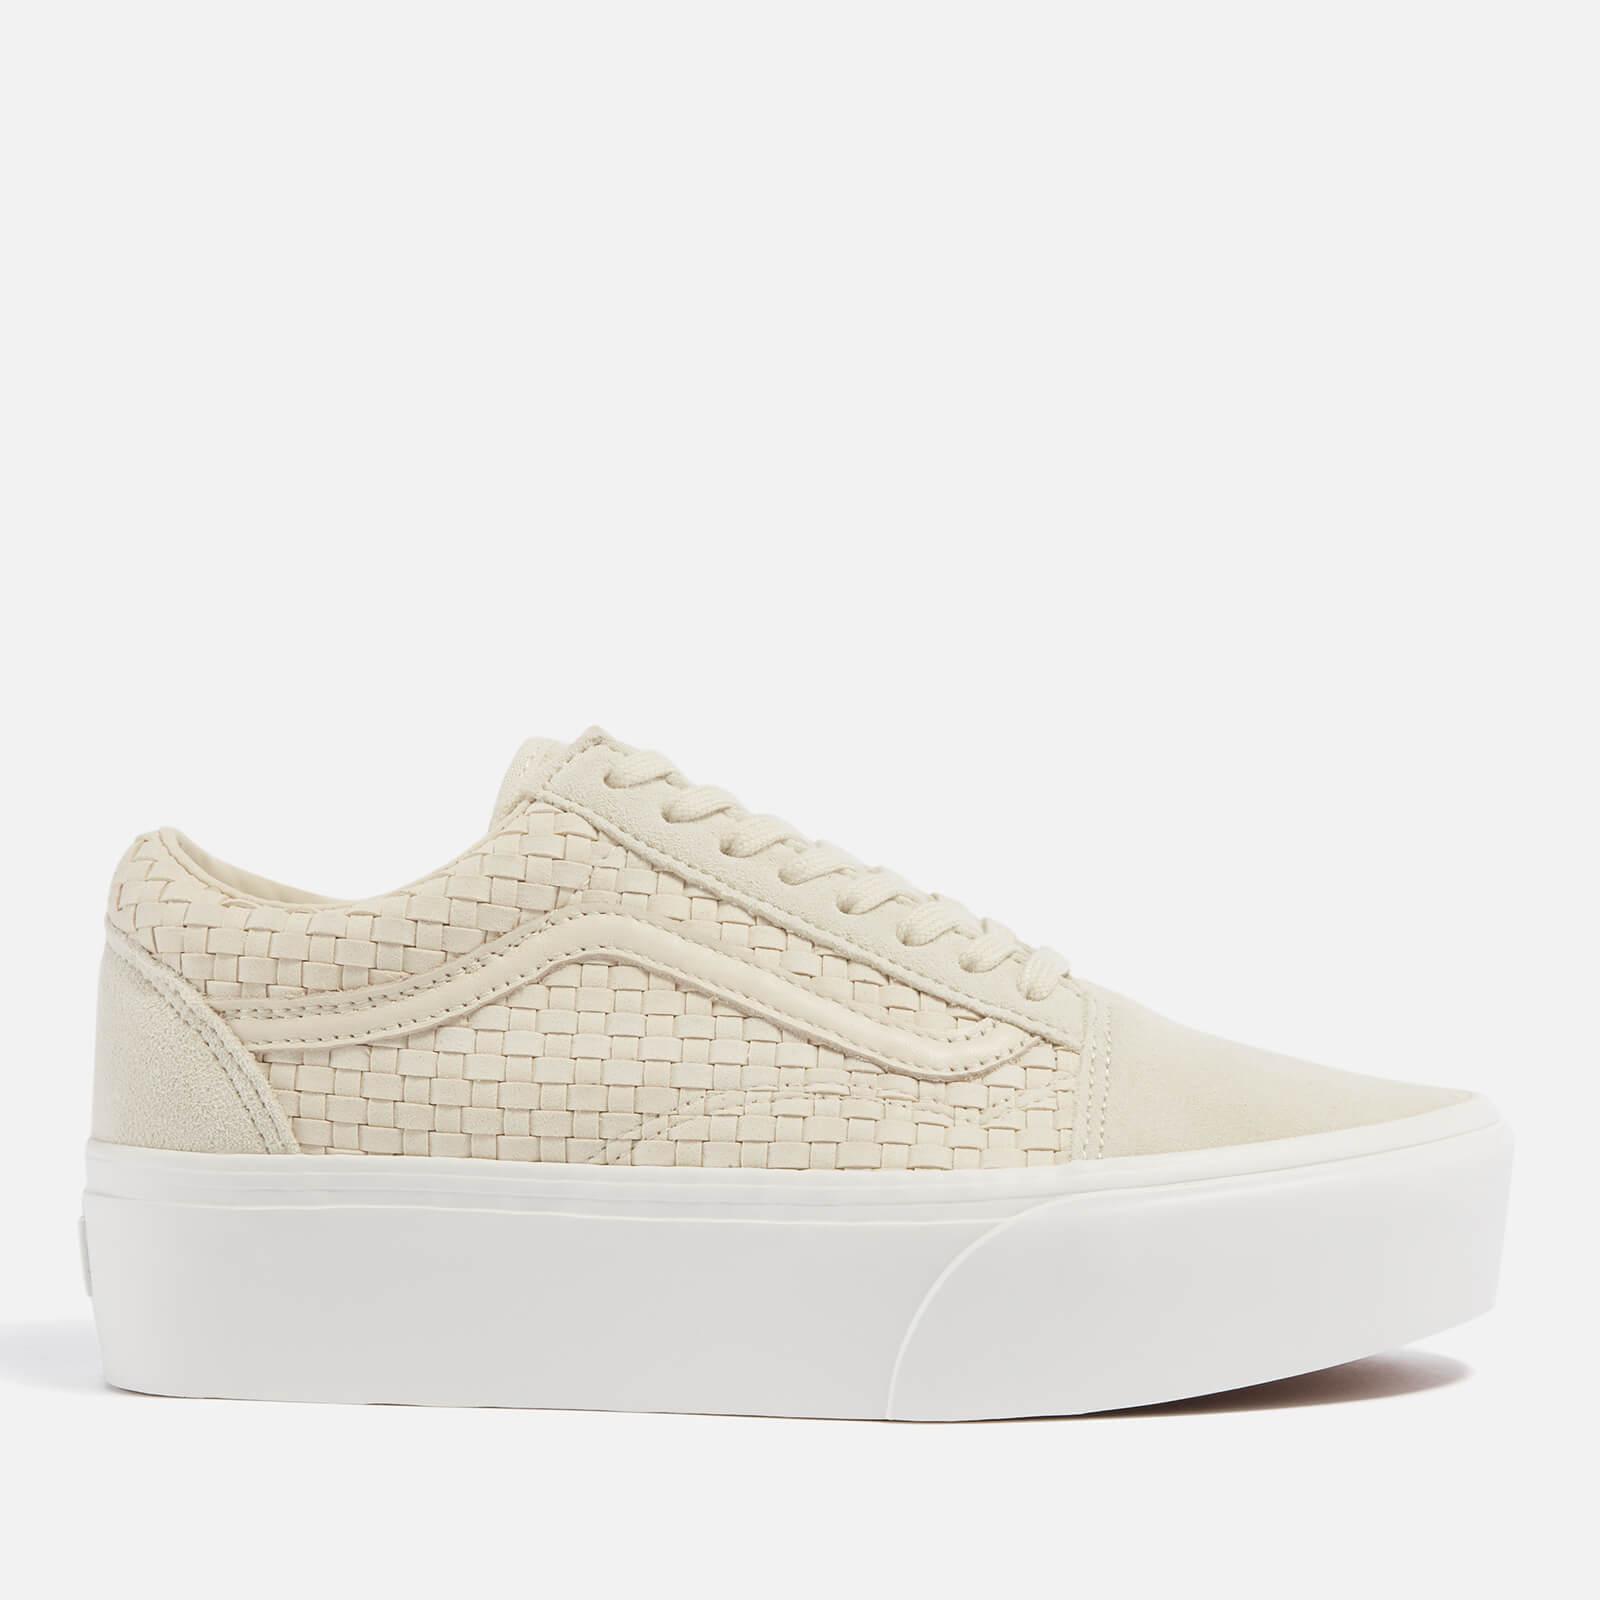 Vans Old Skool Stackform Suede And Canvas Trainers in White | Lyst